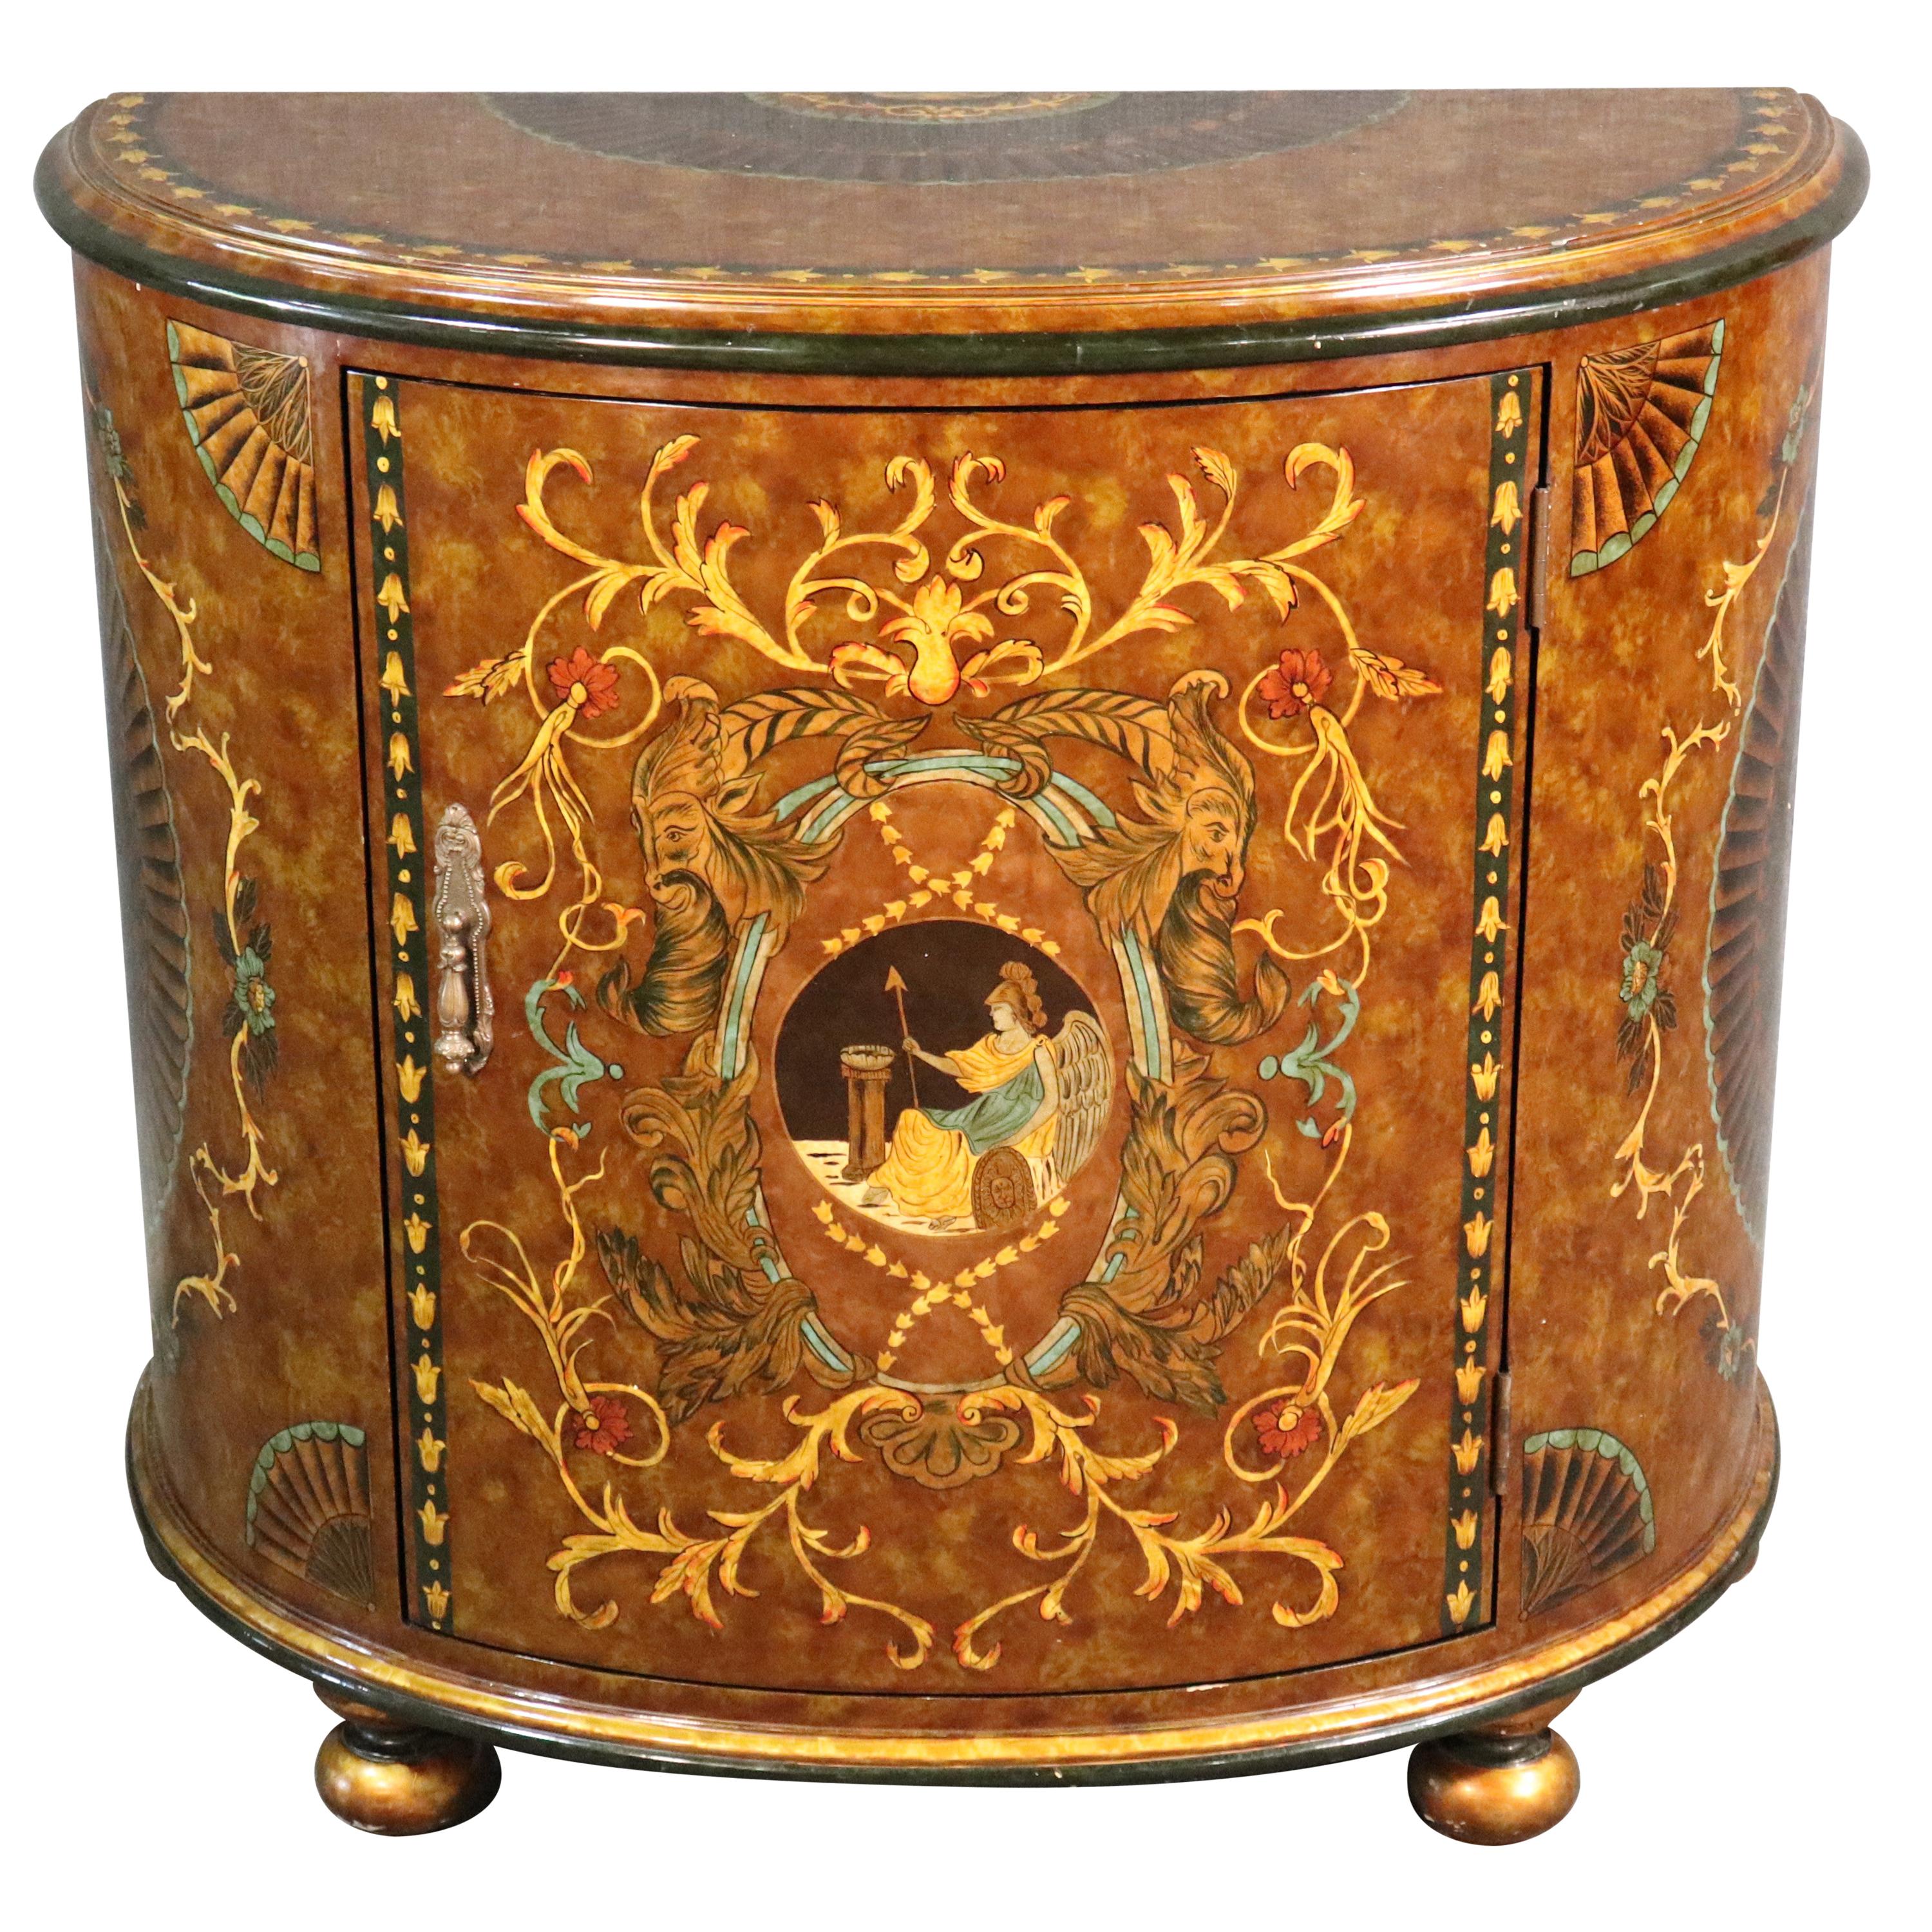 Paint Decorated Venetian Style Demilune Commode Cabinet with Mythical Figures